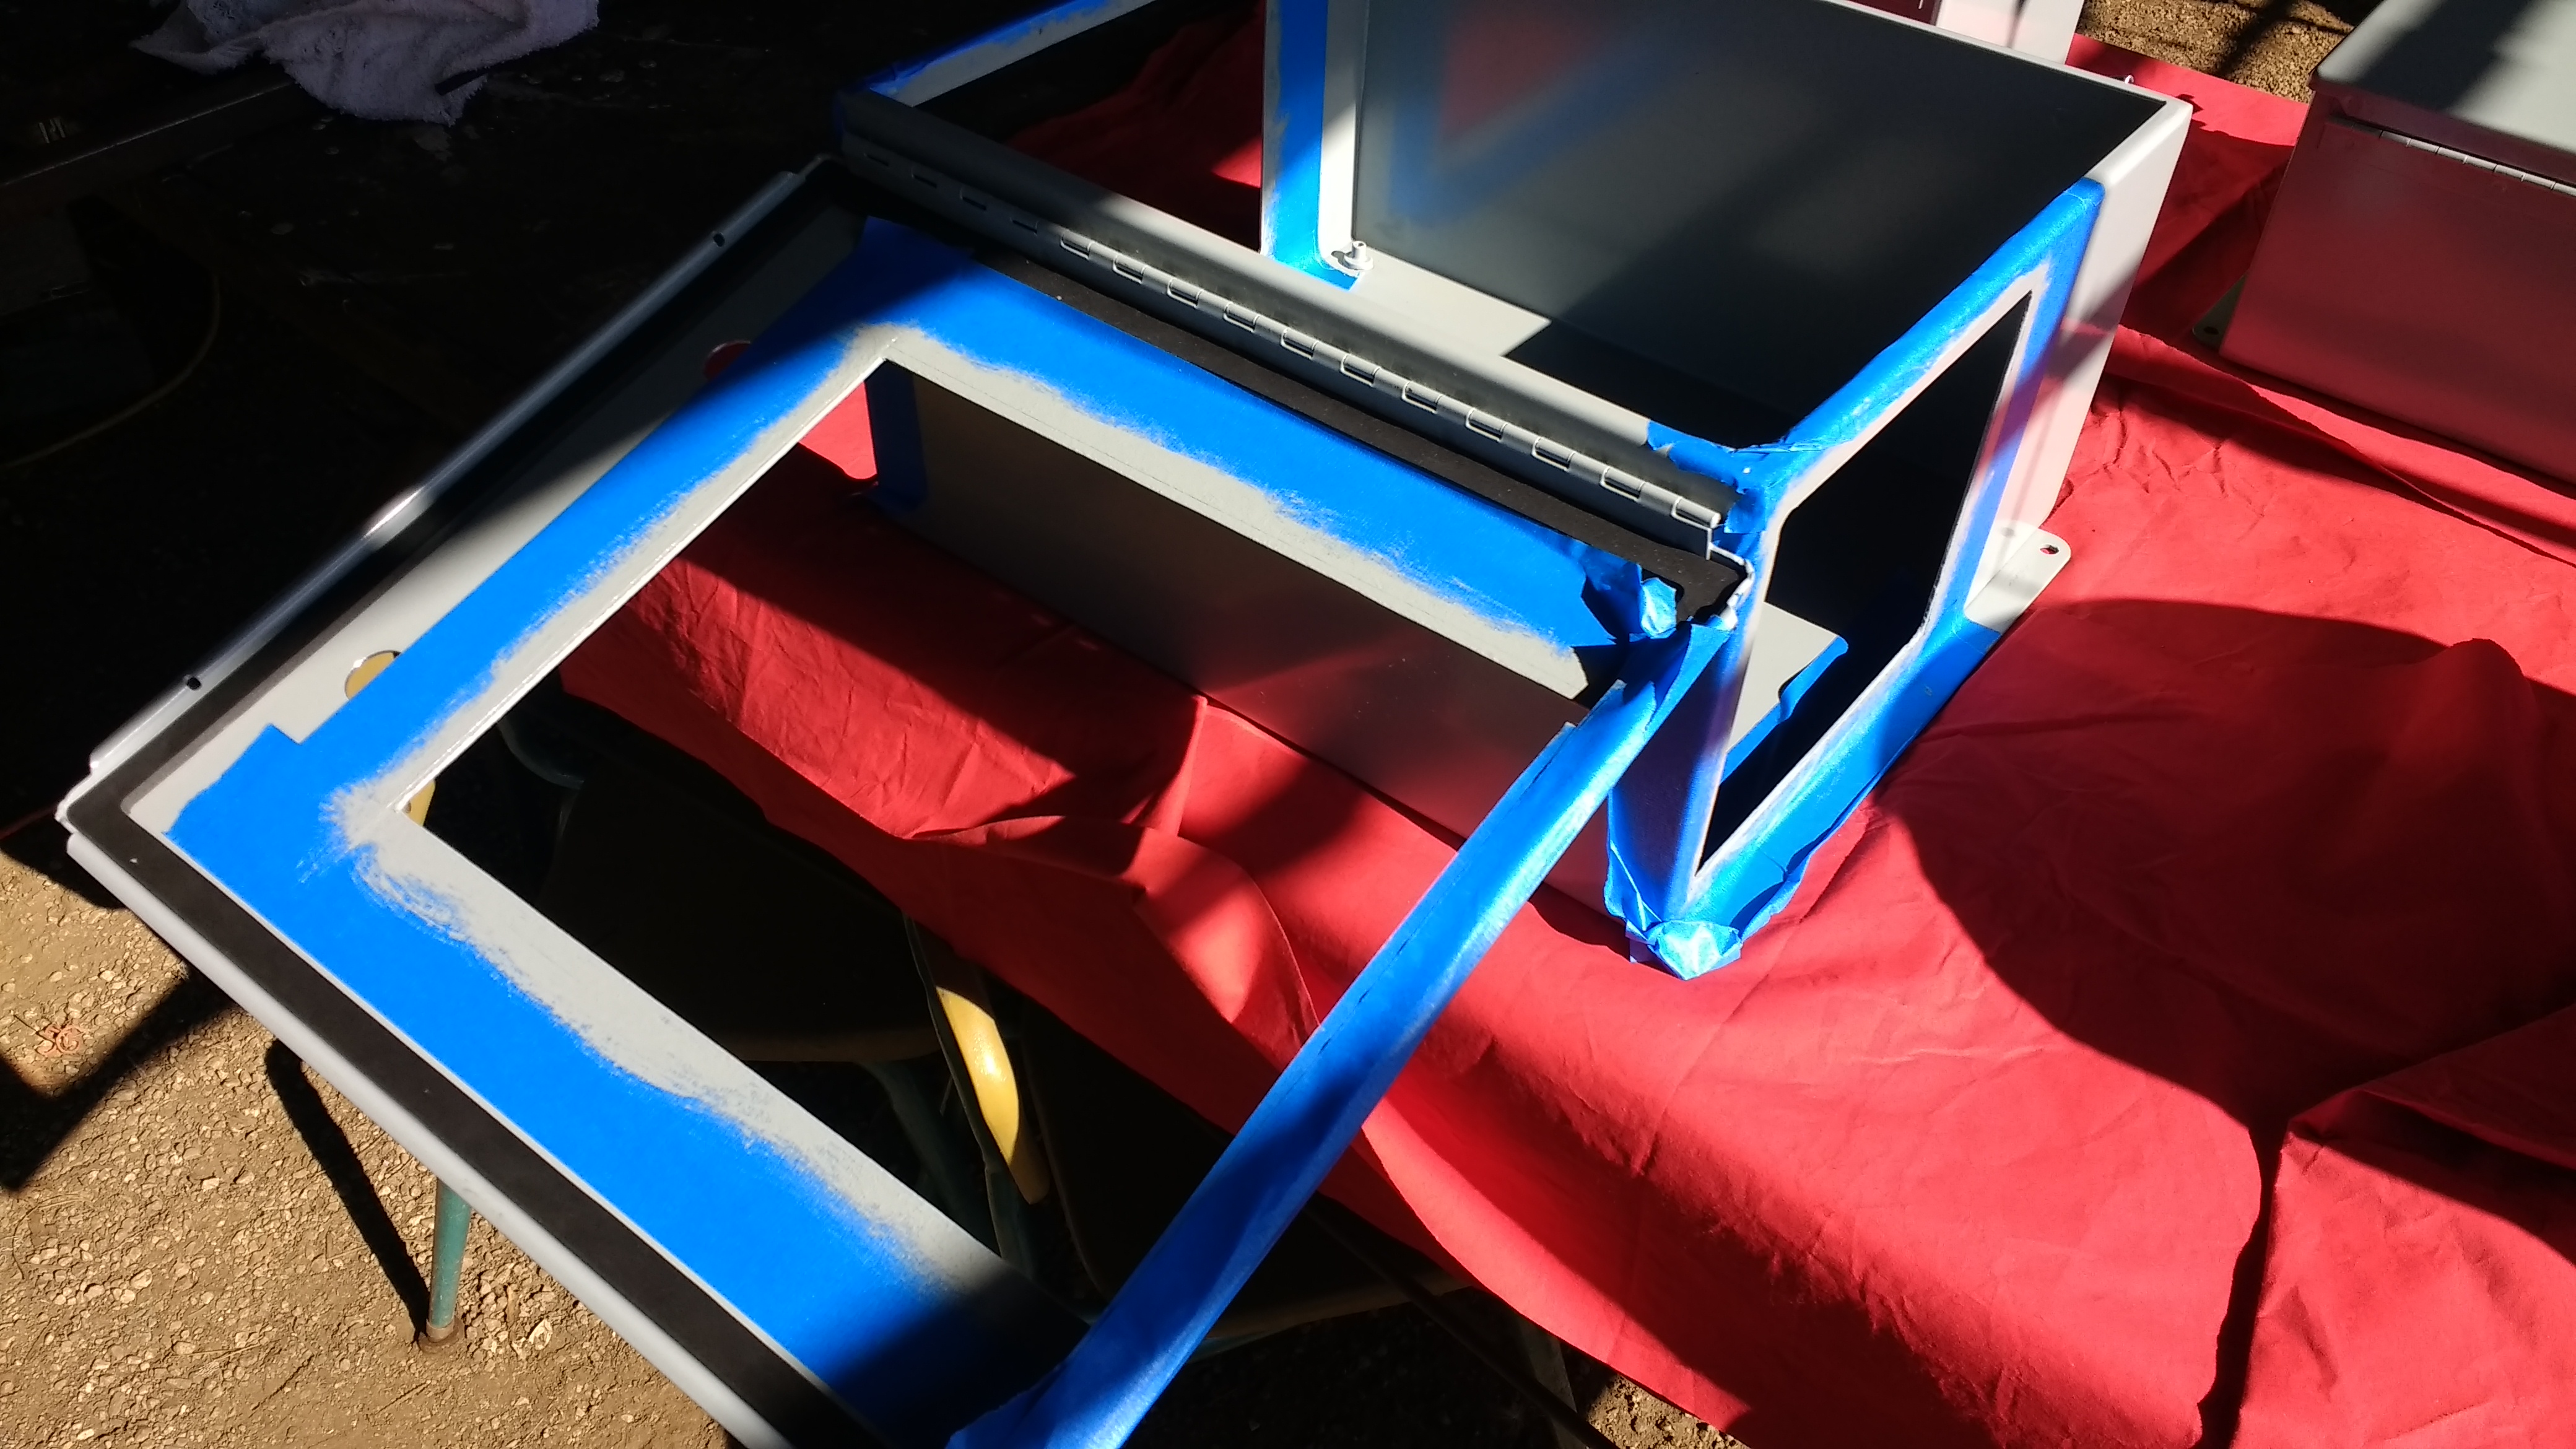 The empty enclosure covered in blue tape for painting the inside lip of the enclosure's cutouts